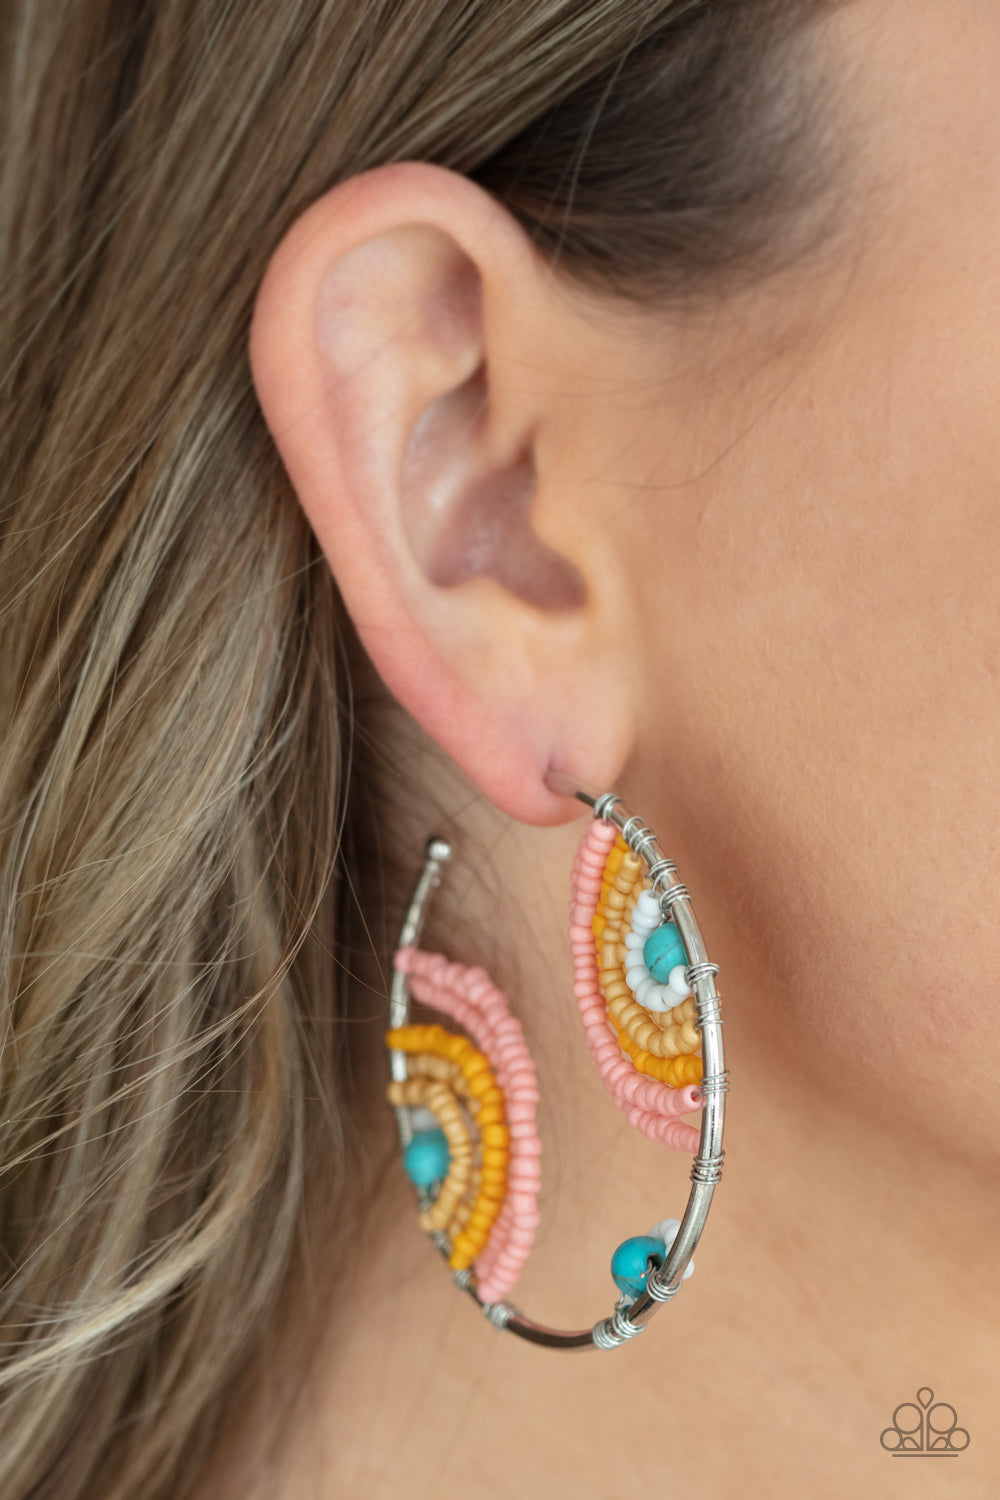 Rainbow Horizons Multi Hoop Earring - Paparazzi Accessories  Rows of white, Desert Mist, Marigold, and Burnt Coral seed beads curl around turquoise stone centers, creating colorful rainbows inside a delicate wire wrapped hoop. Hoop measures approximately 2" in diameter. Earring attaches to a standard post fitting.  All Paparazzi Accessories are lead free and nickel free!  Sold as one pair of hoop earrings.